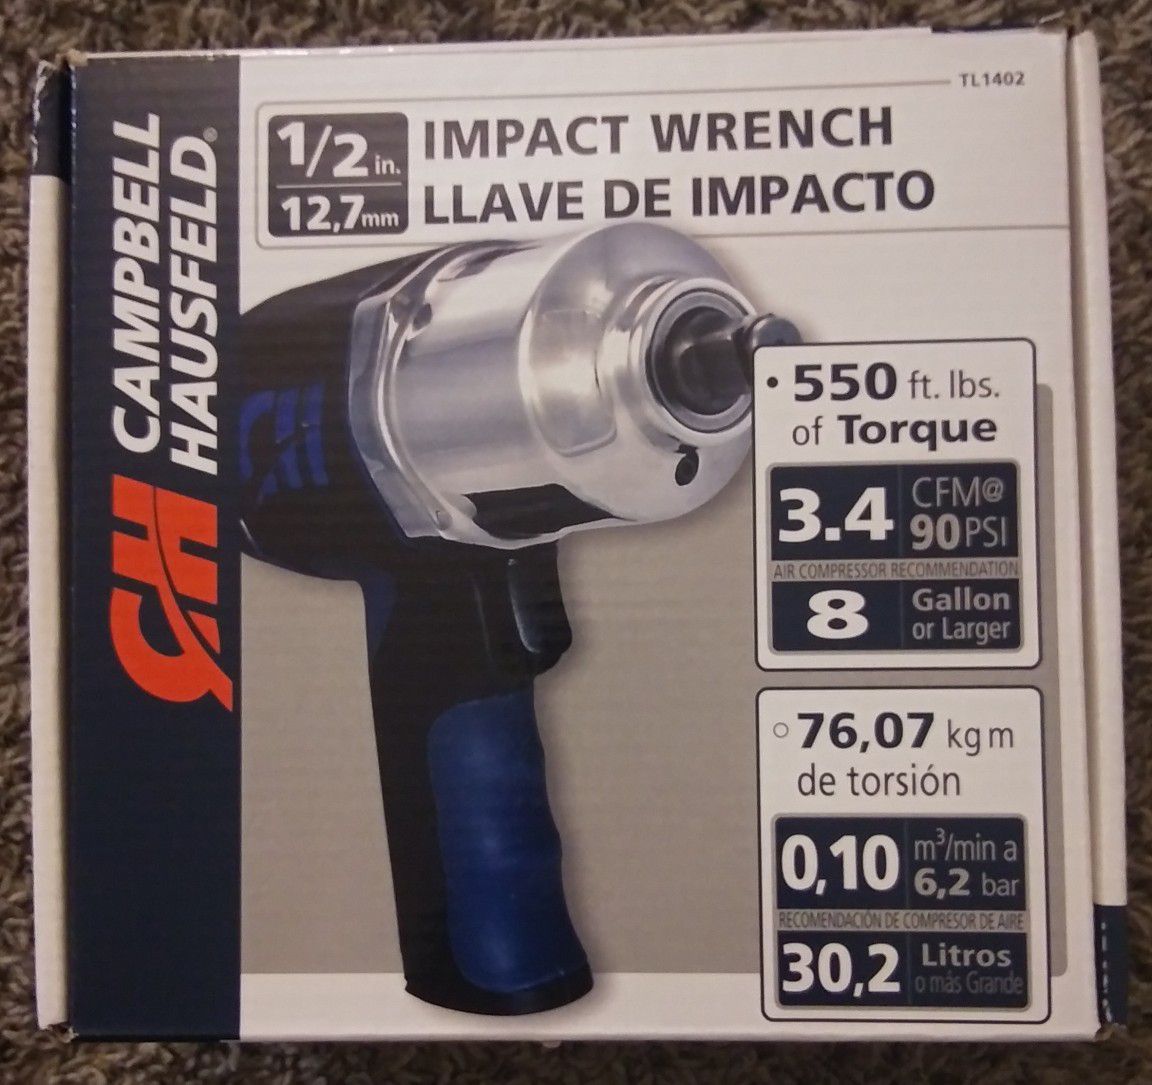 BRAND NEW. Campbell Hausfeld 1/2in Impact Wrench